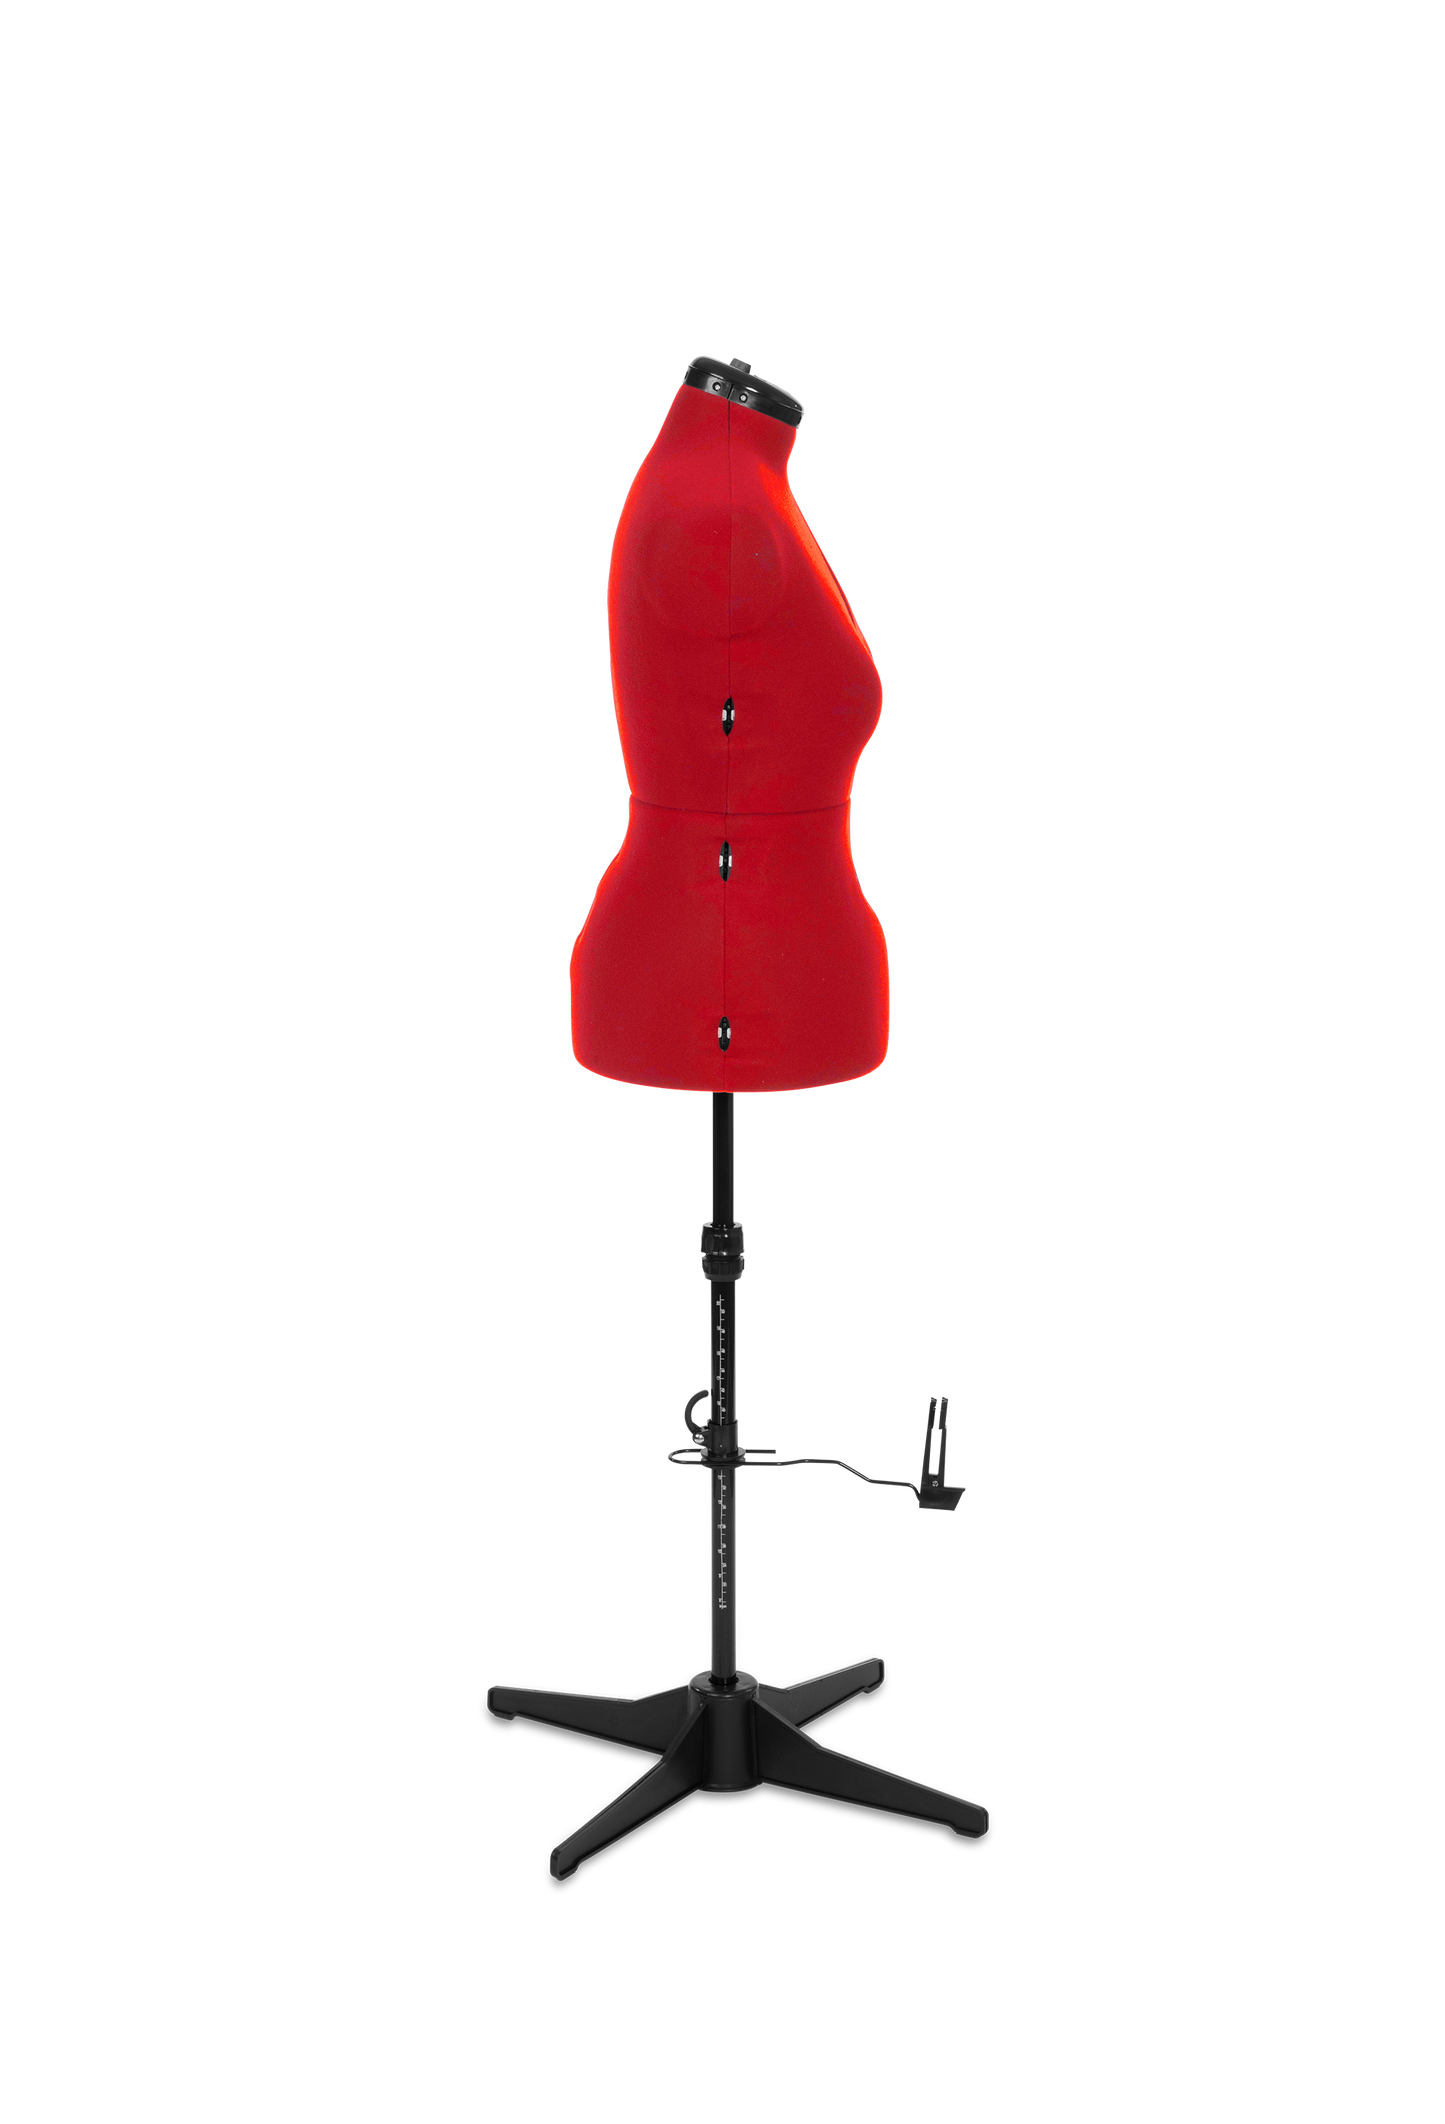 Adjustoform Tailormaid Adjustable Dress Form * Limited Edition Singer Red * 11 adjusters - Dress sizes 6 to 22 in 2 size options - Made in the UK